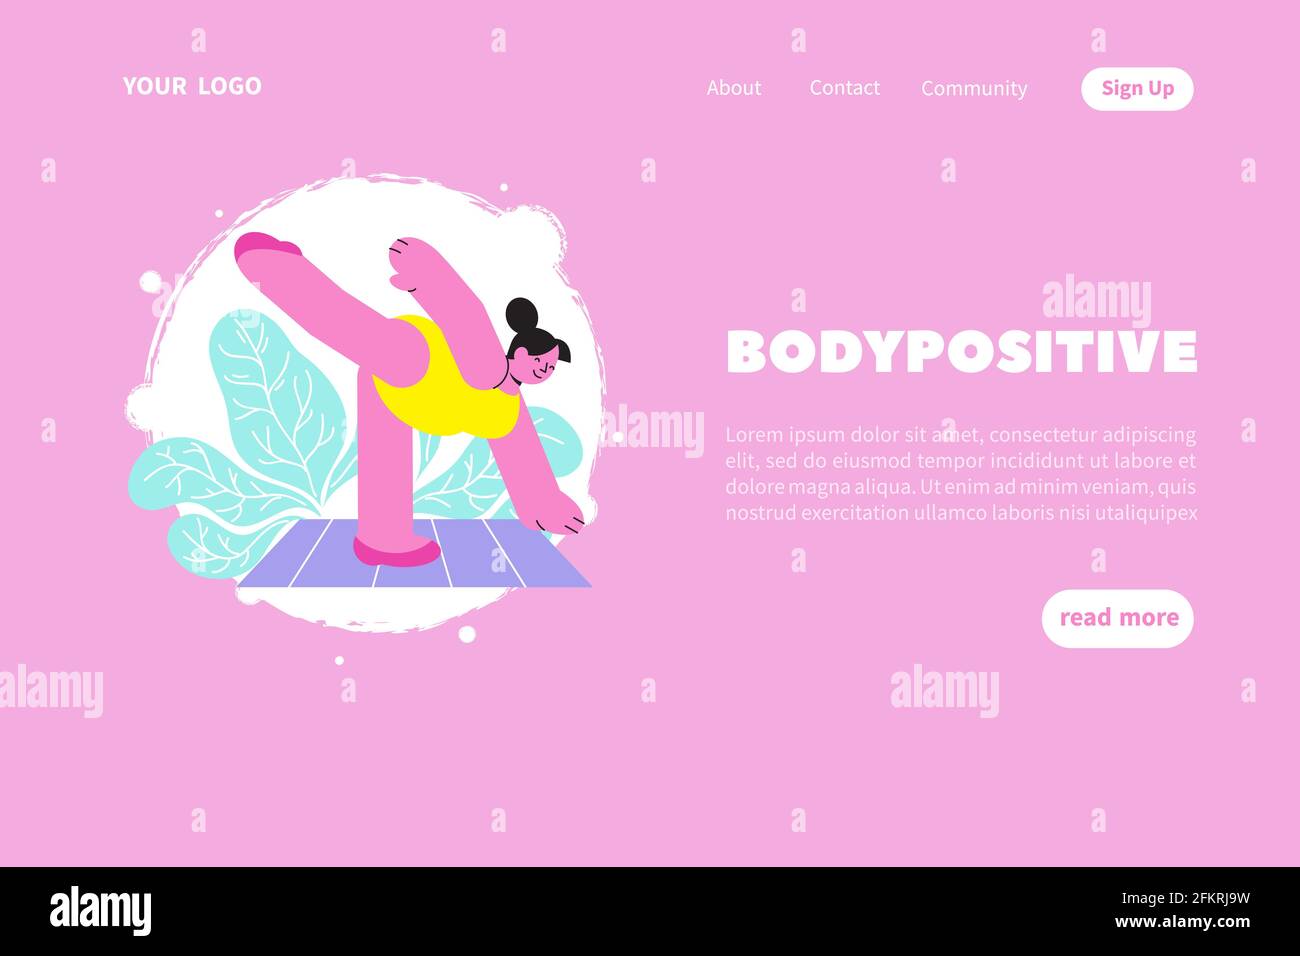 Body positive web site landing page background with clickable links buttons editable text and doodle images vector illustration Stock Vector